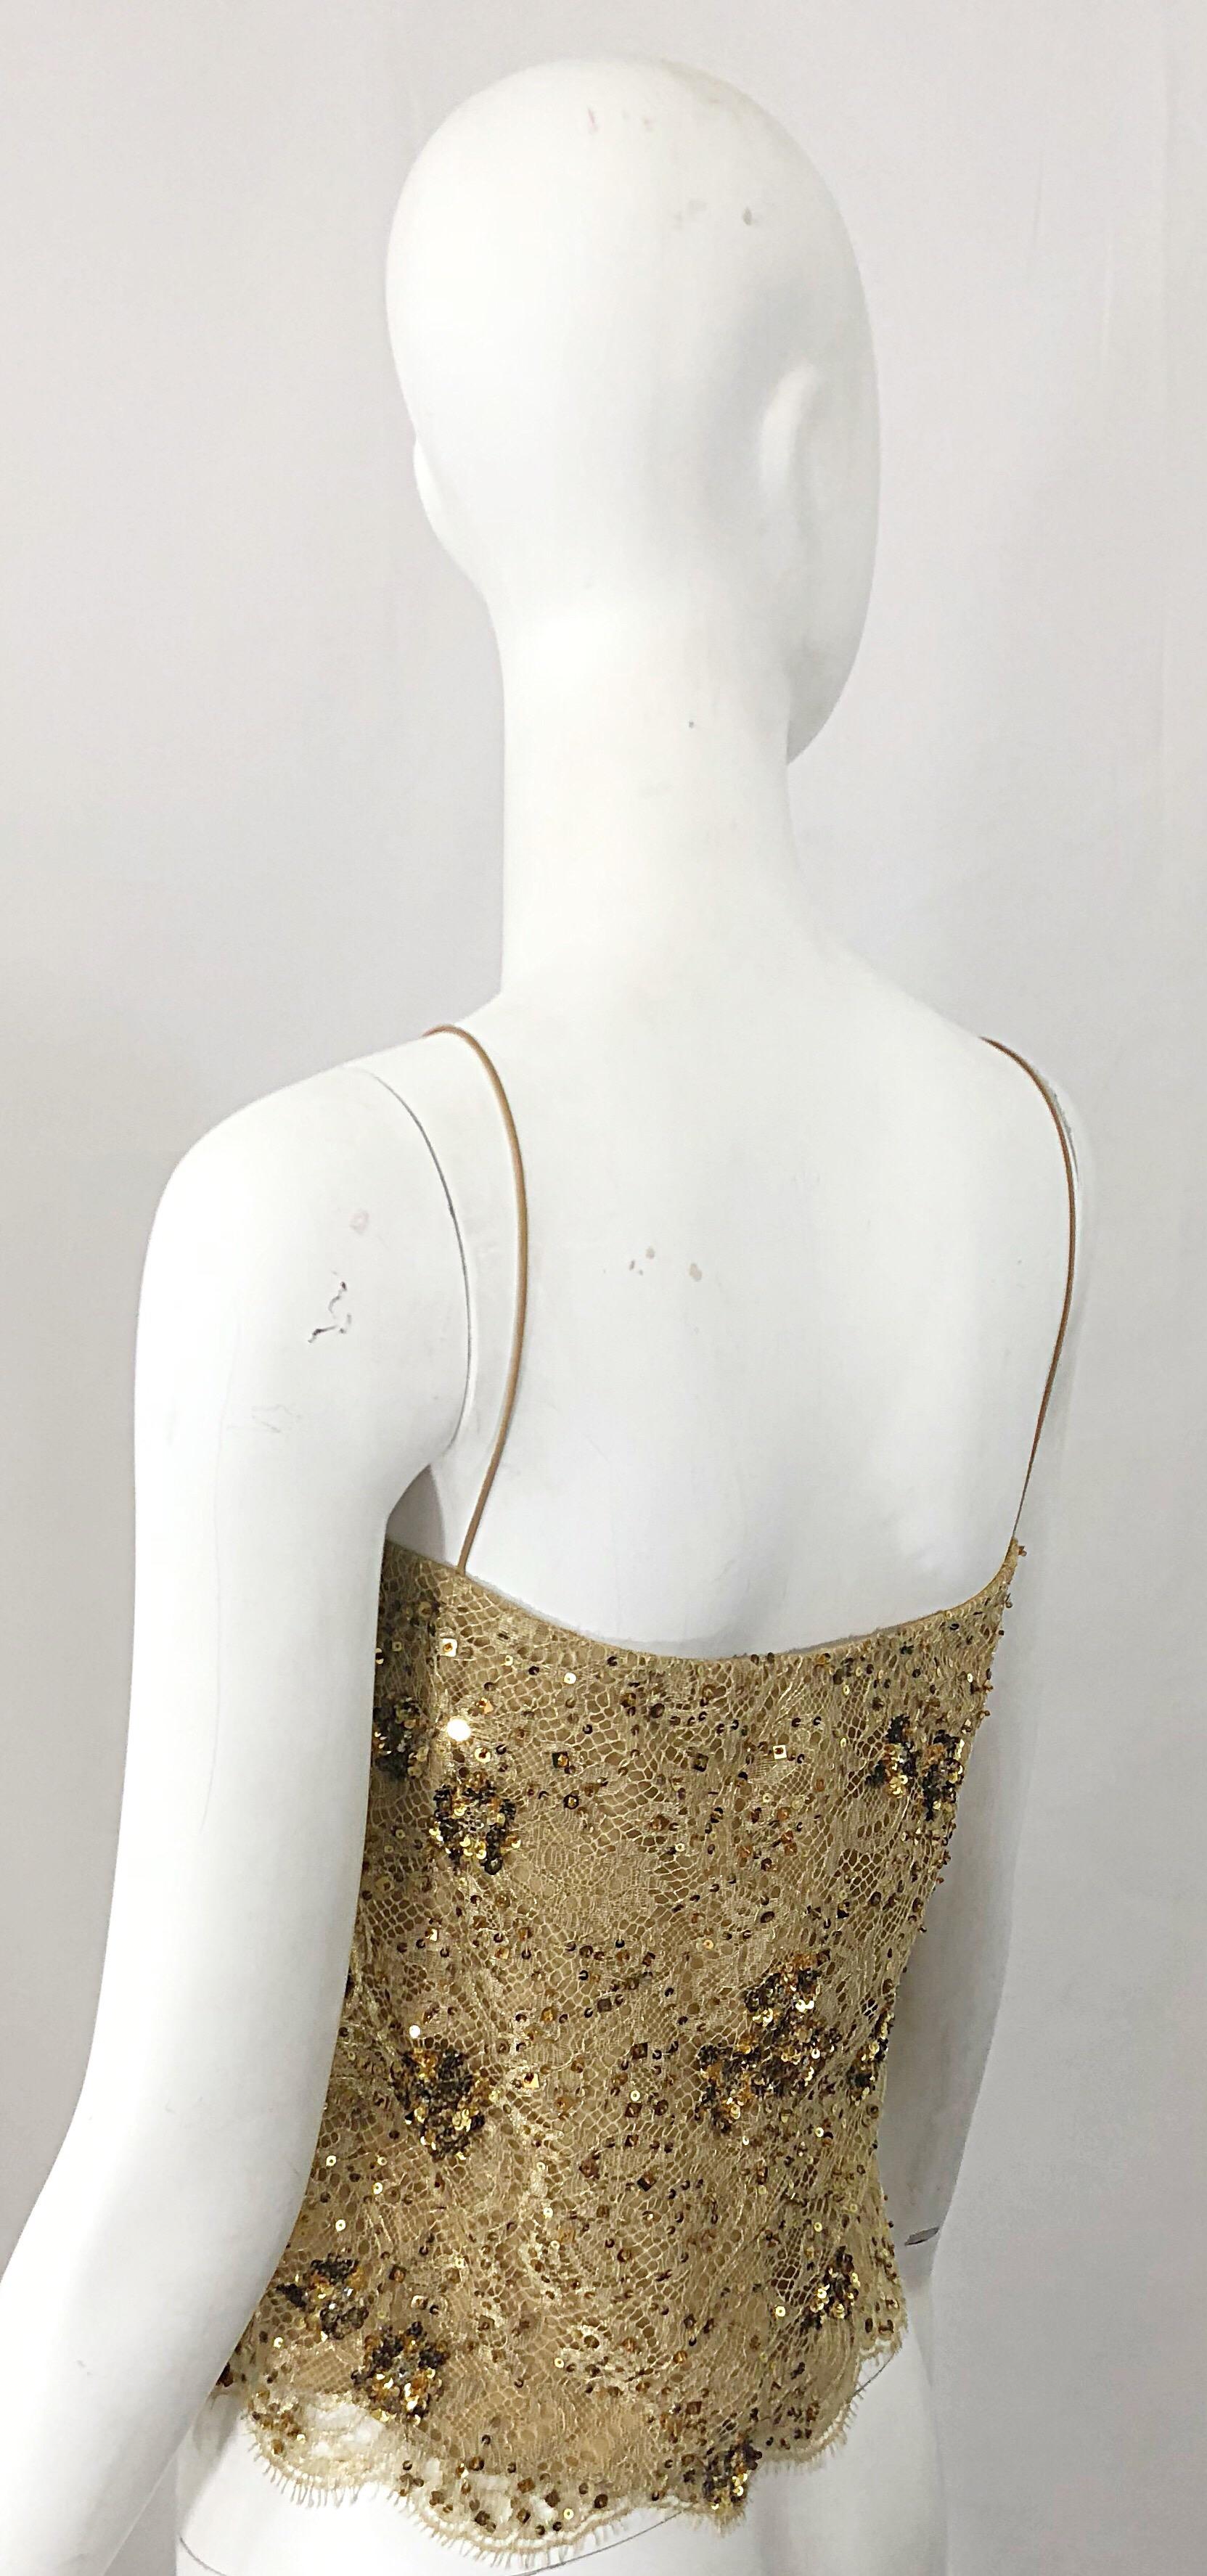 1990s Badgley Mischka Size 10 / 12 Gold Lace Sequins and Beads Vintage 90s Top For Sale 3